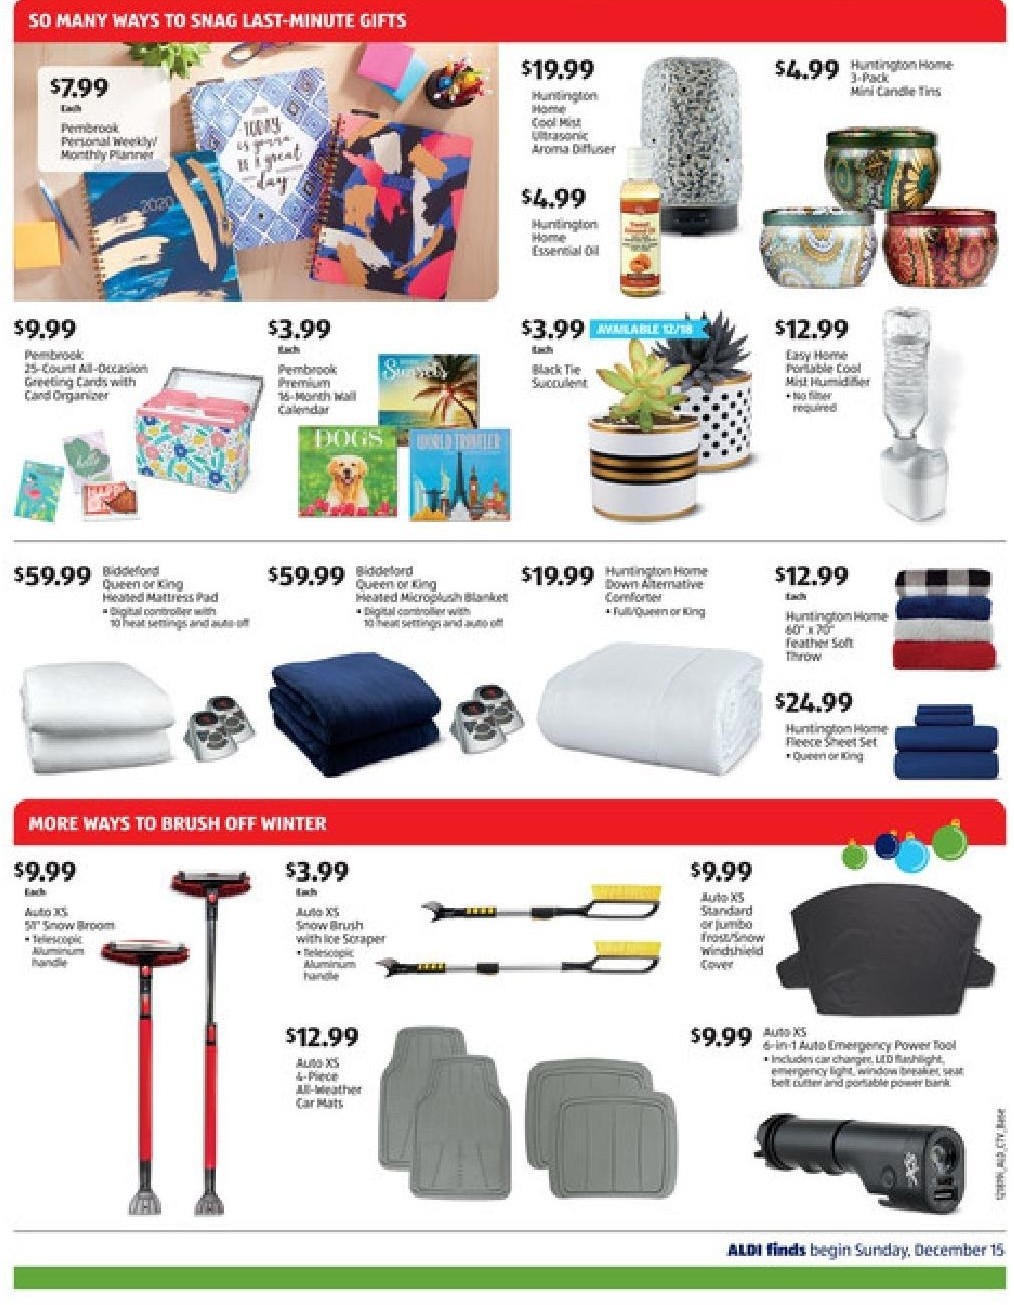 ALDI Weekly Ad from December 15